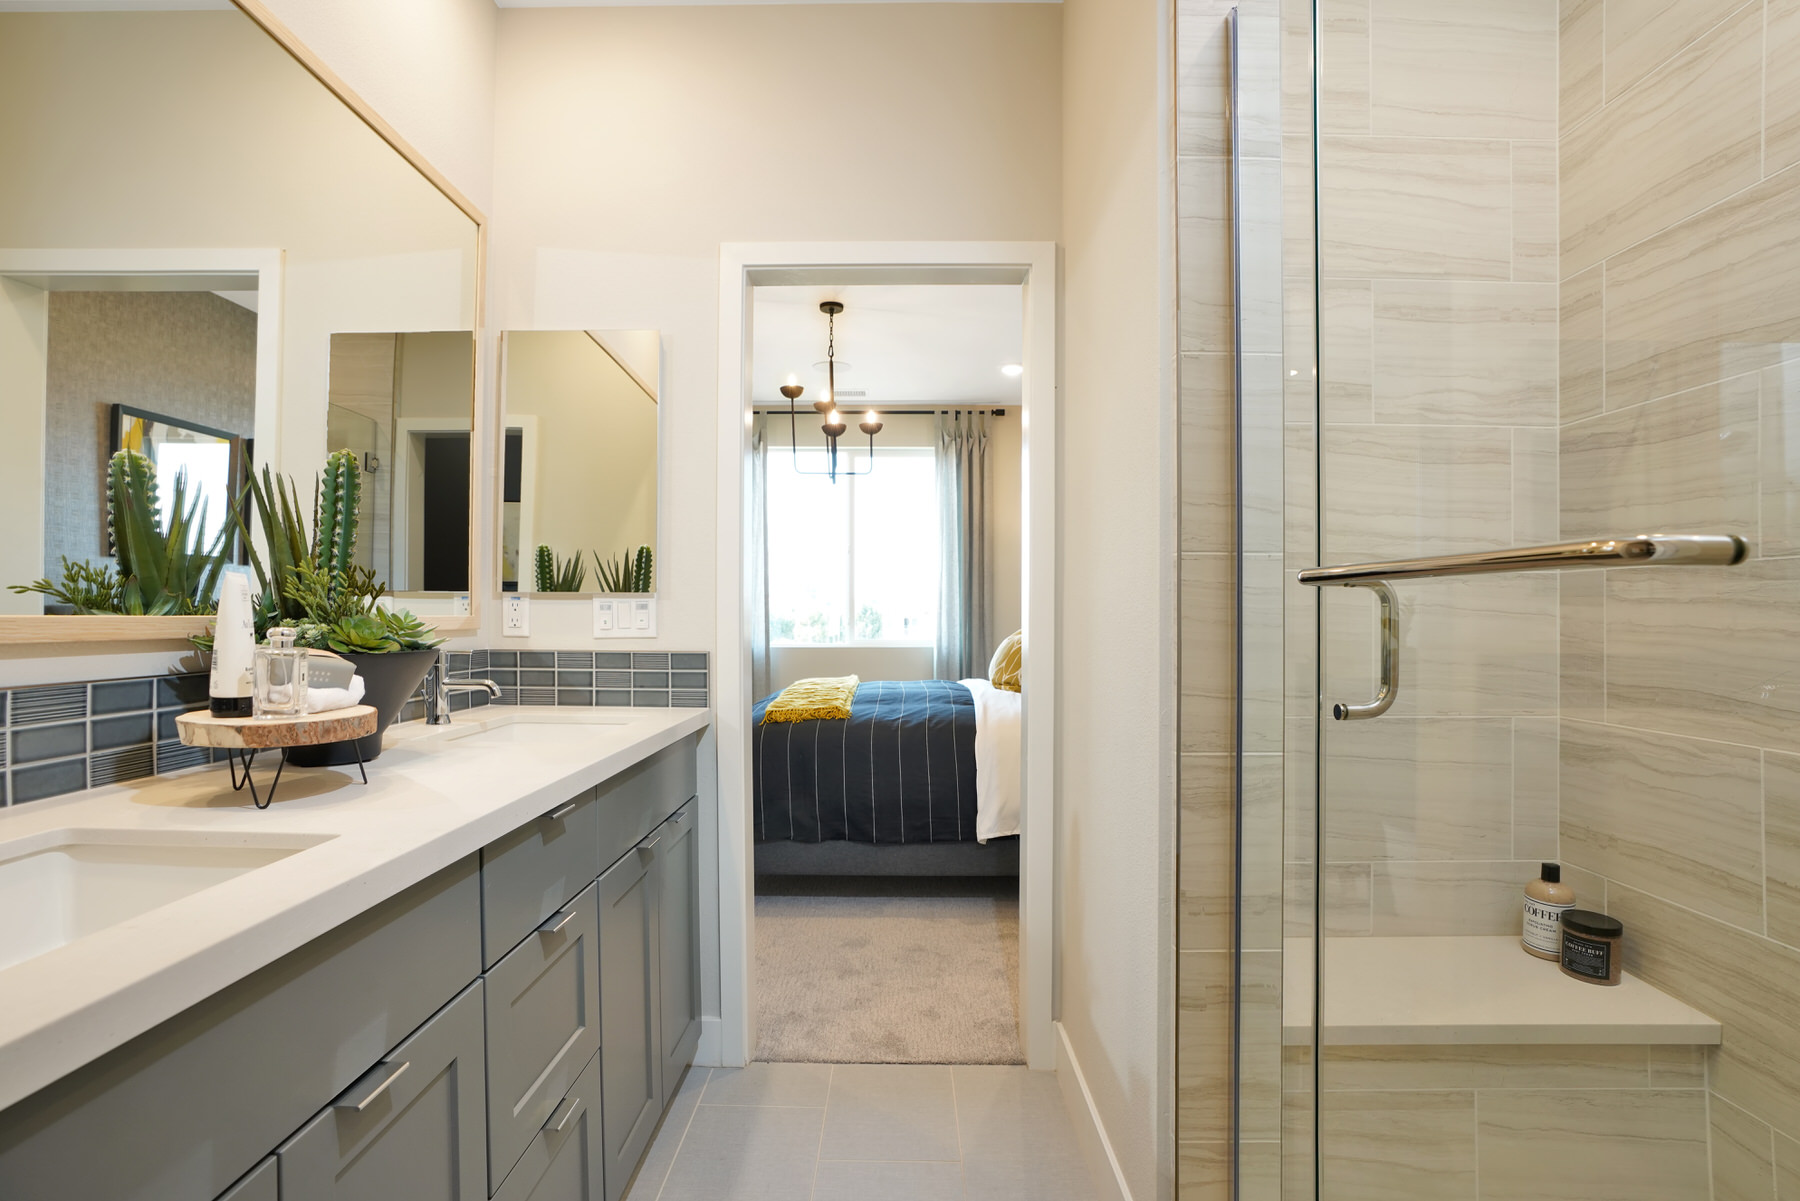 Primary Bath/Bedroom in Plan 3A at Townes at Magnolia by Melia Homes in Anaheim, CA